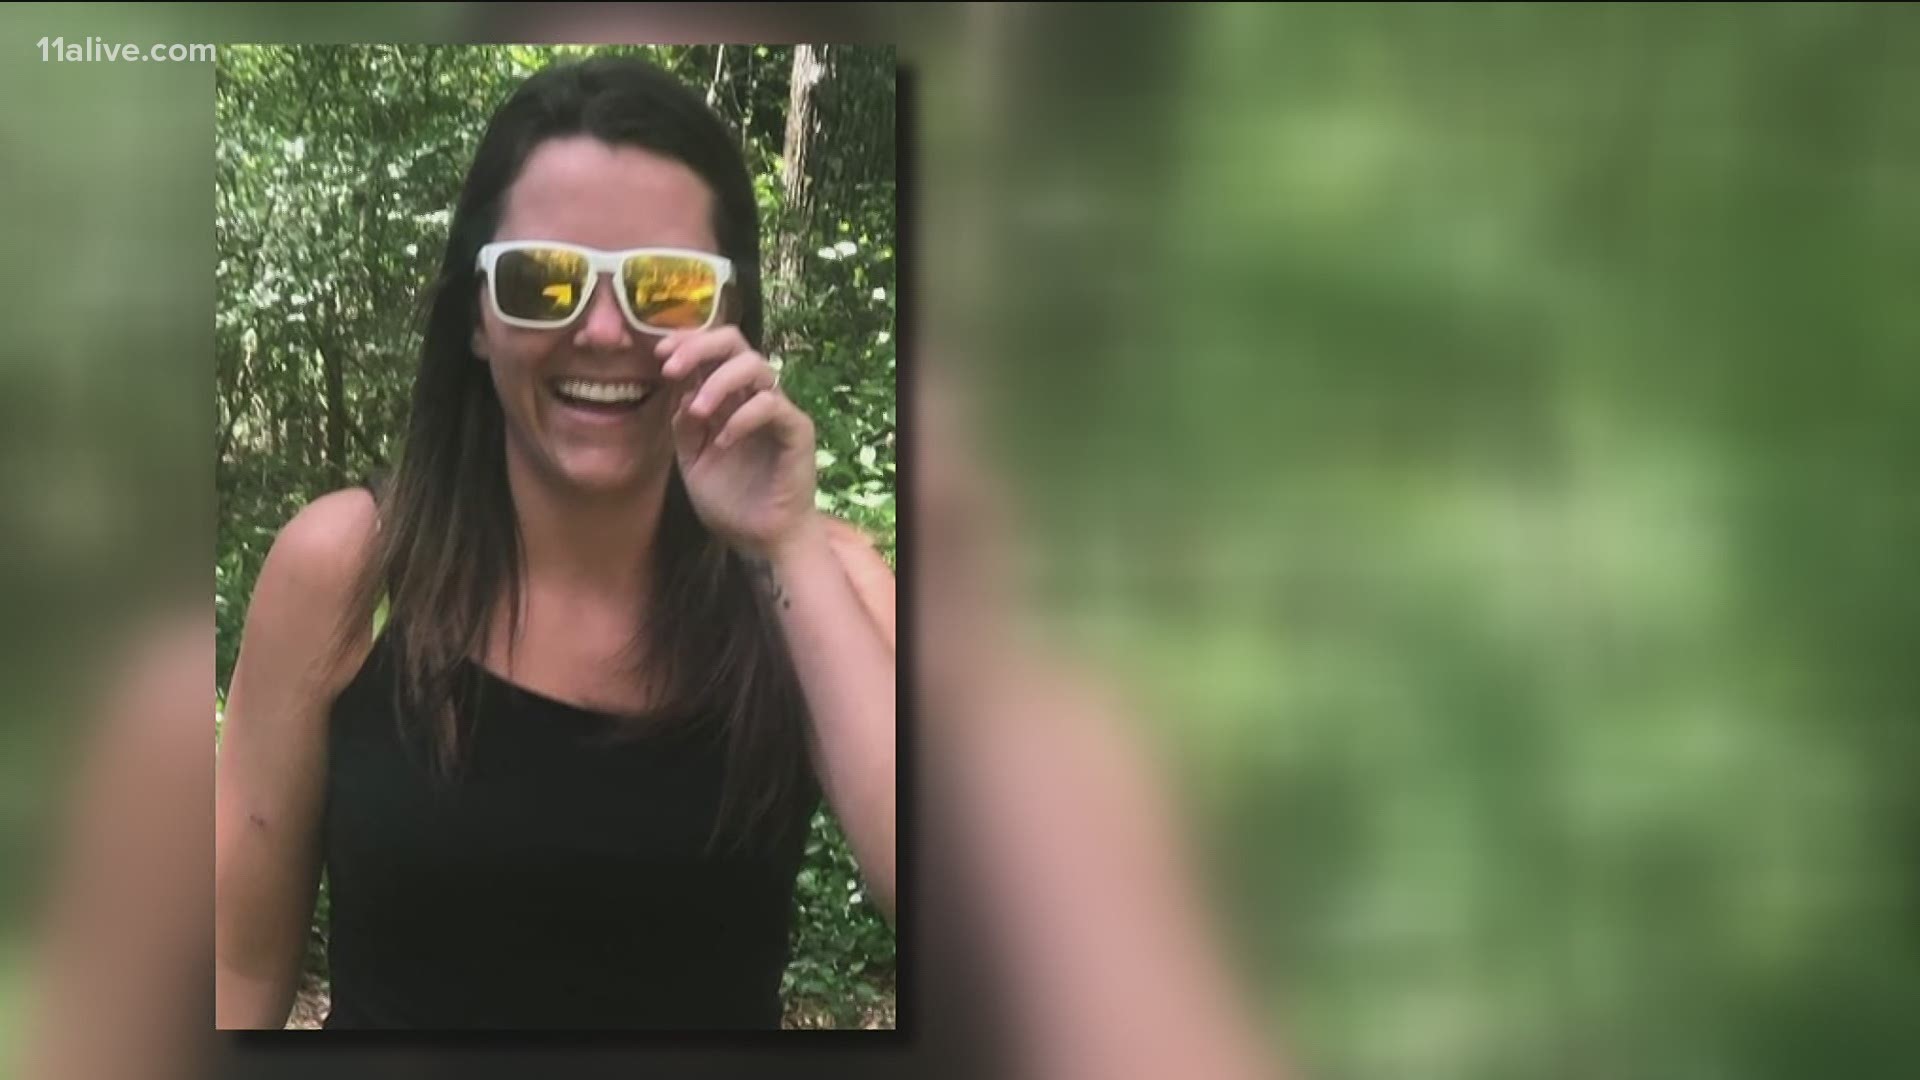 On Tuesday, authorities confirmed that they found the car belonging to Natalie Jones near Franklin, Georgia. Family says a body found inside is hers.